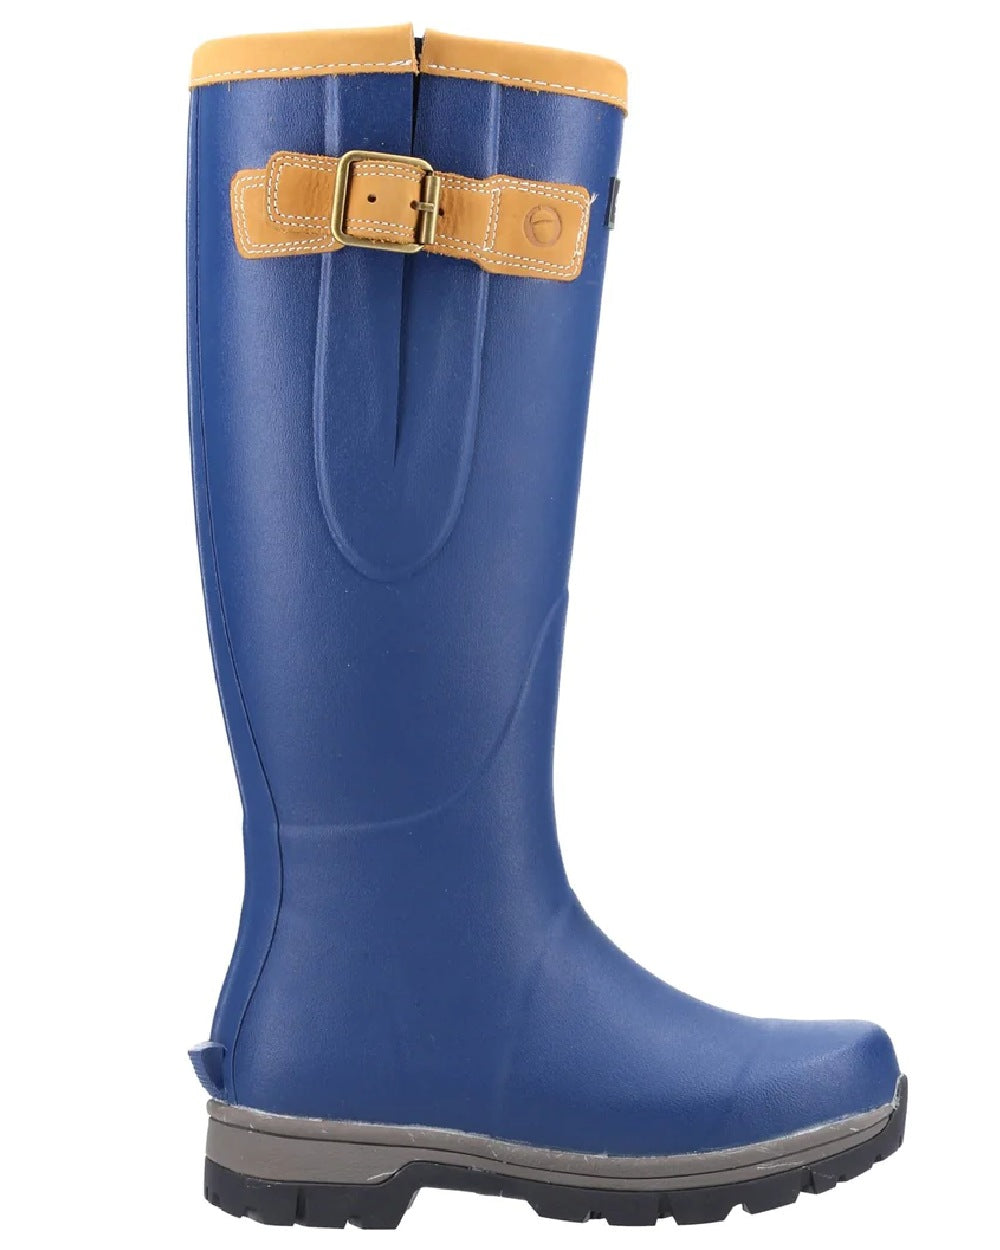 Cotswold Stratus Wellington Boots in Blue 